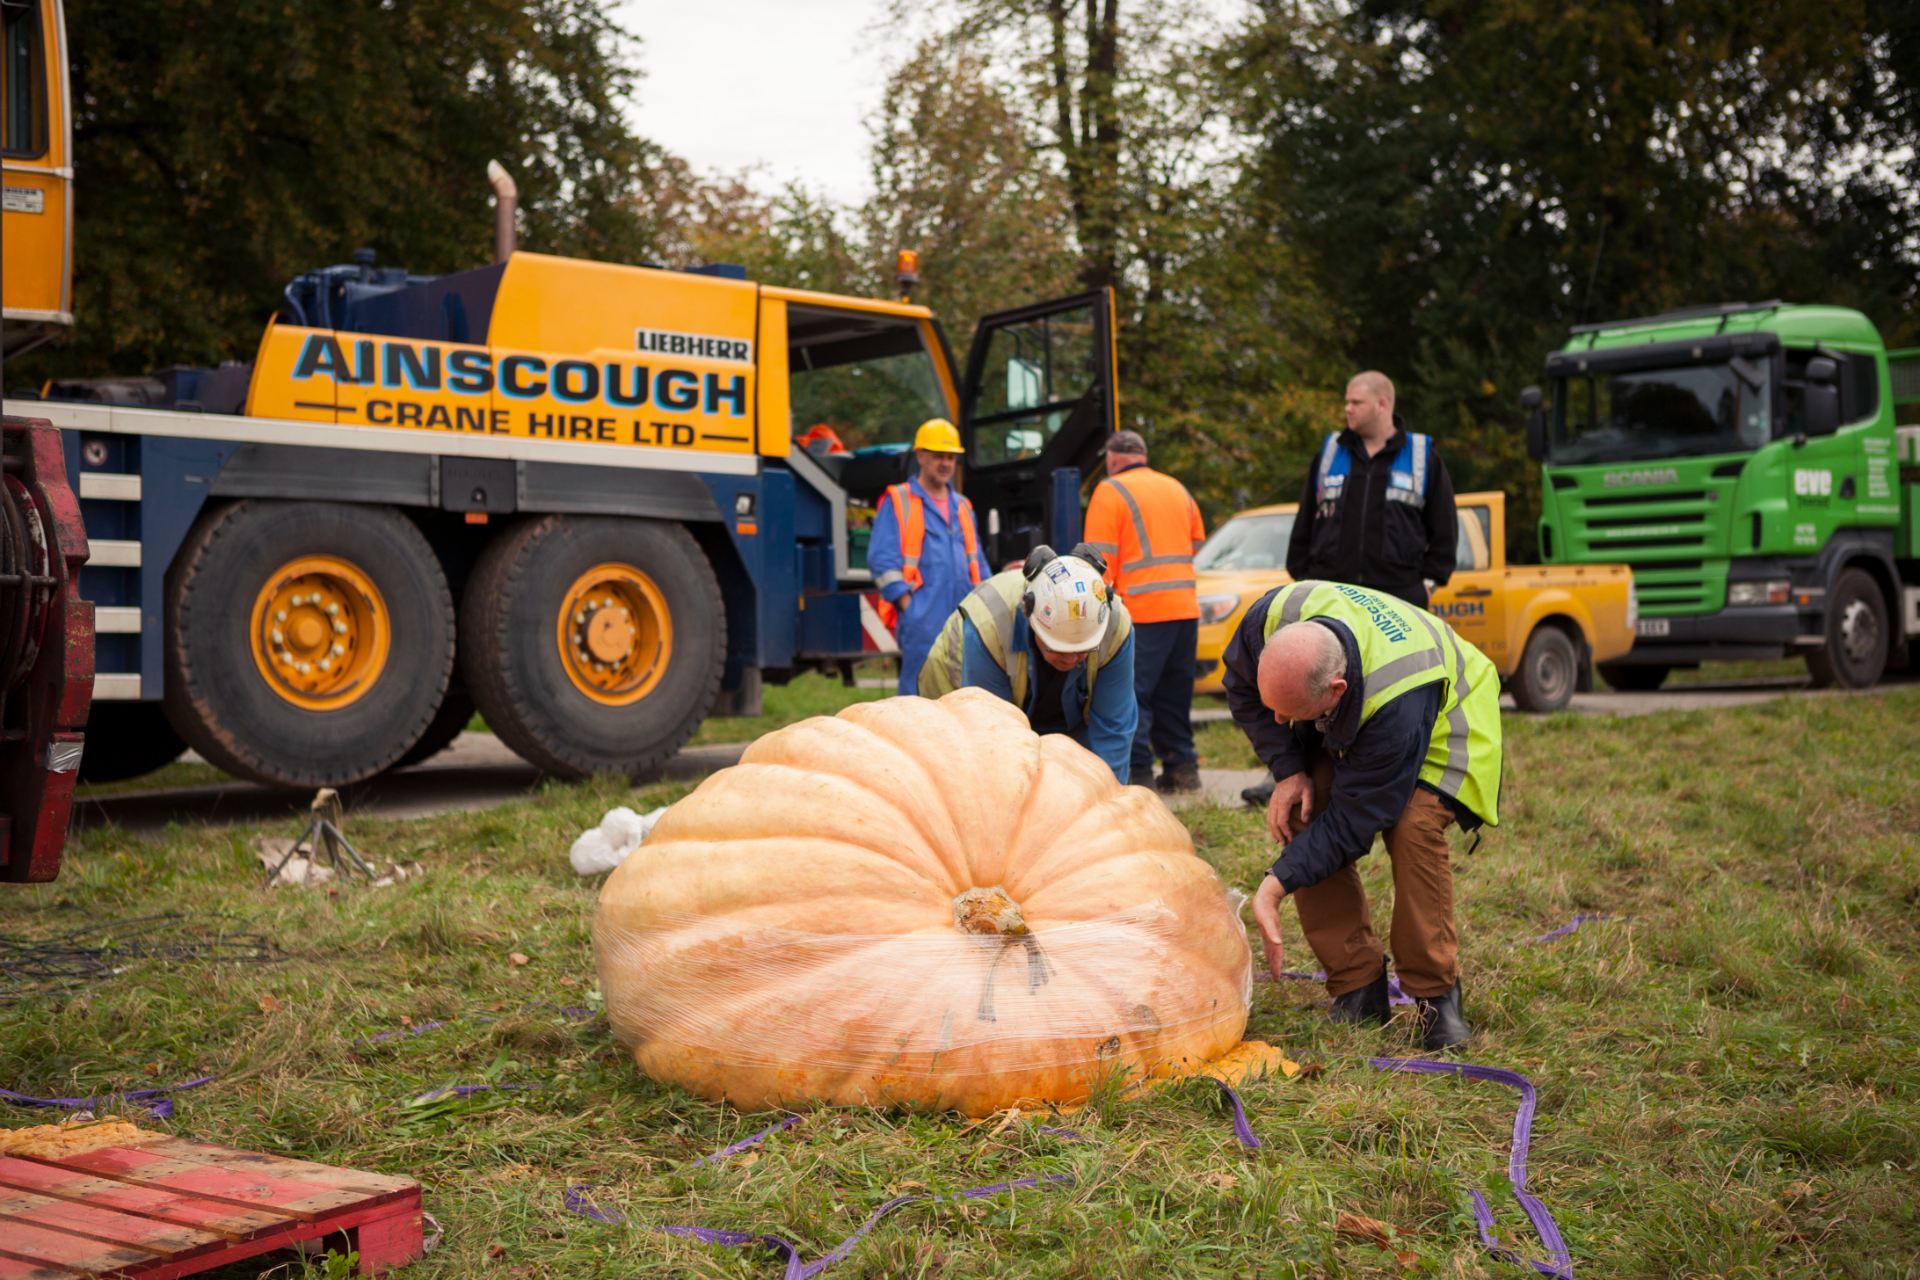 Artist Melanie Jackson launches her new publication The Nexus with a series of performance events at the University of Bristol's Botanic Gardens including the release of a giant pumpkin from the full height of a crane, 2013. Photo: Max McClure